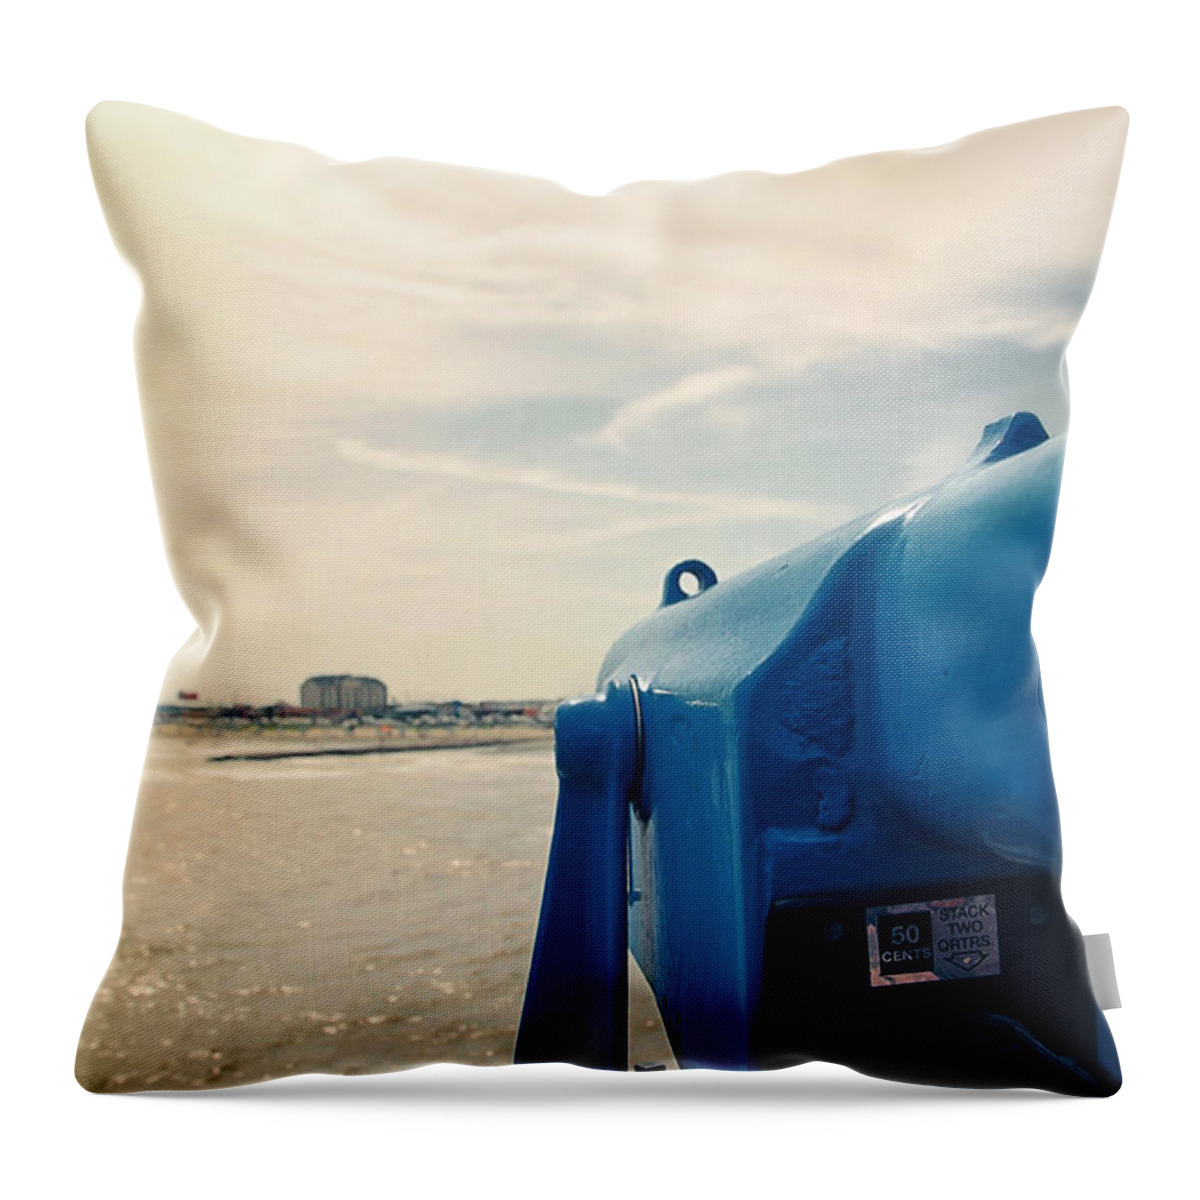 Binoculars Throw Pillow featuring the photograph The View by Trish Mistric